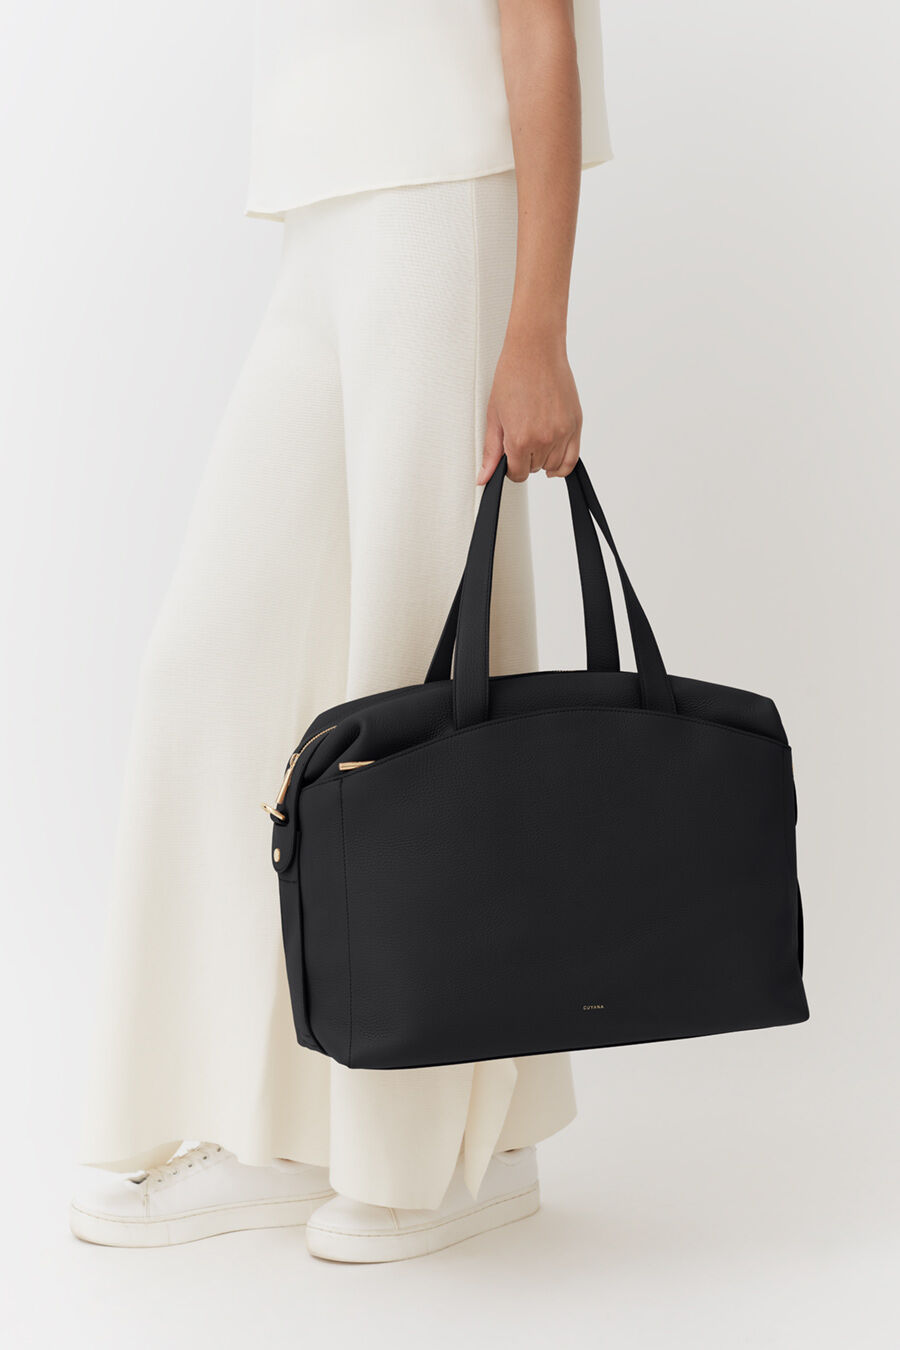 Cuyana Overnight Bag  : Your Ultimate Travel Companion